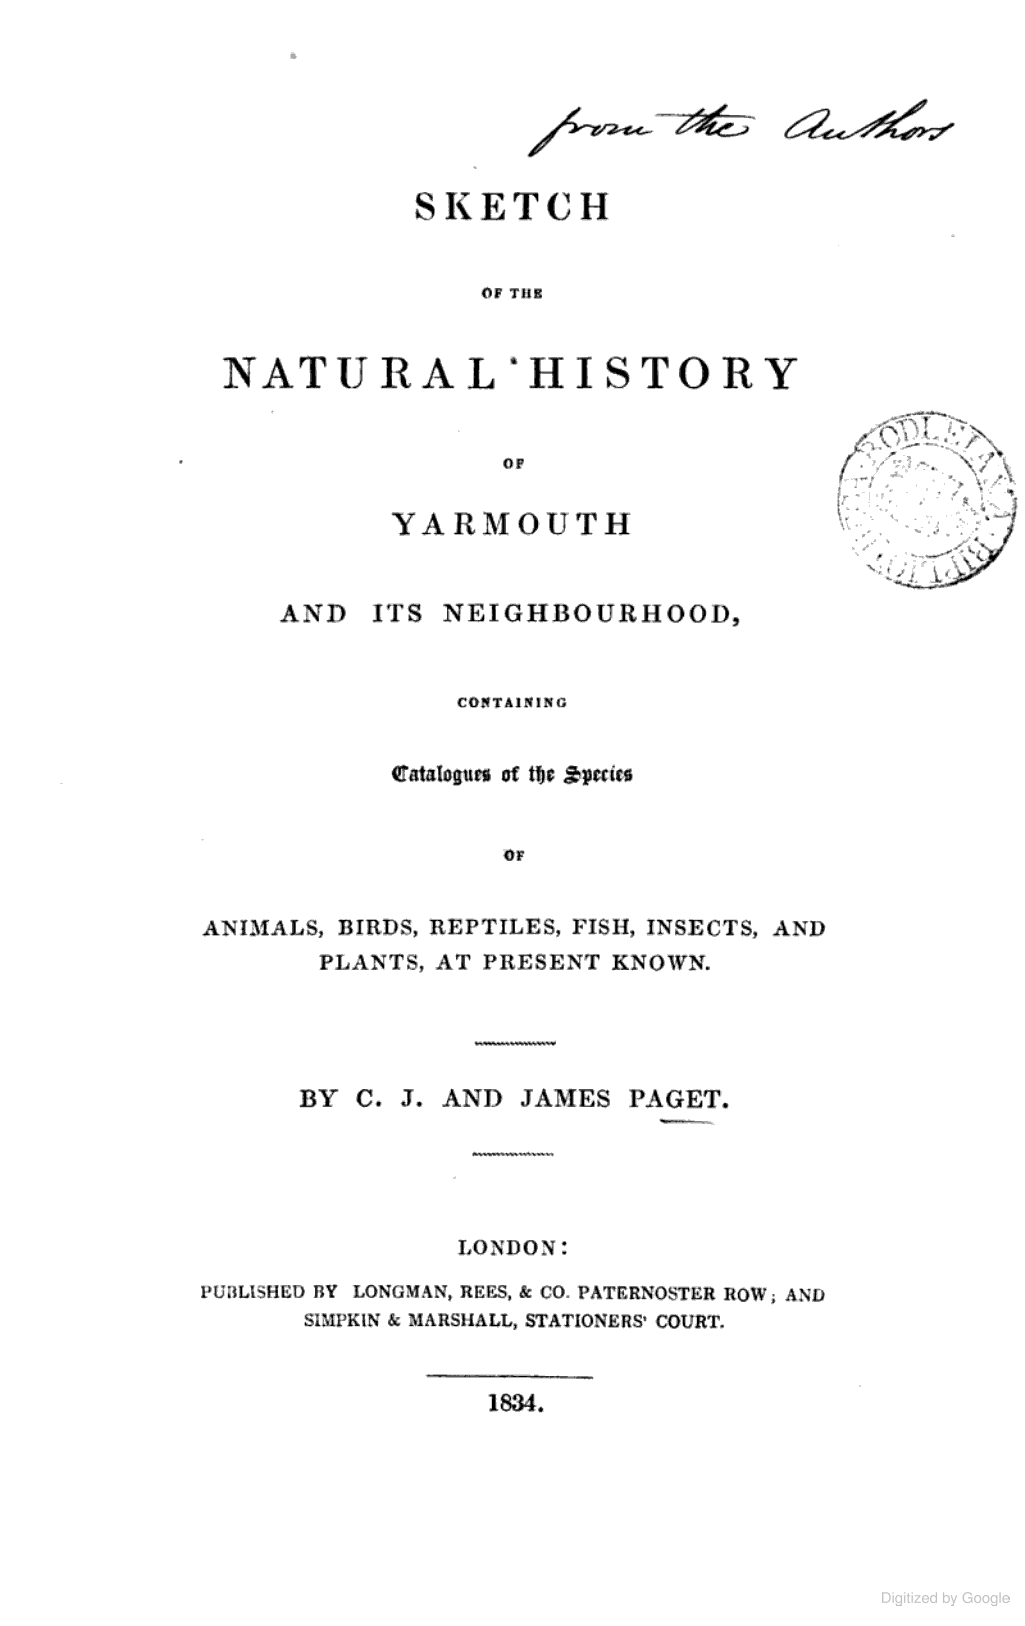 Sketch of the natural history of Yarmouth cover